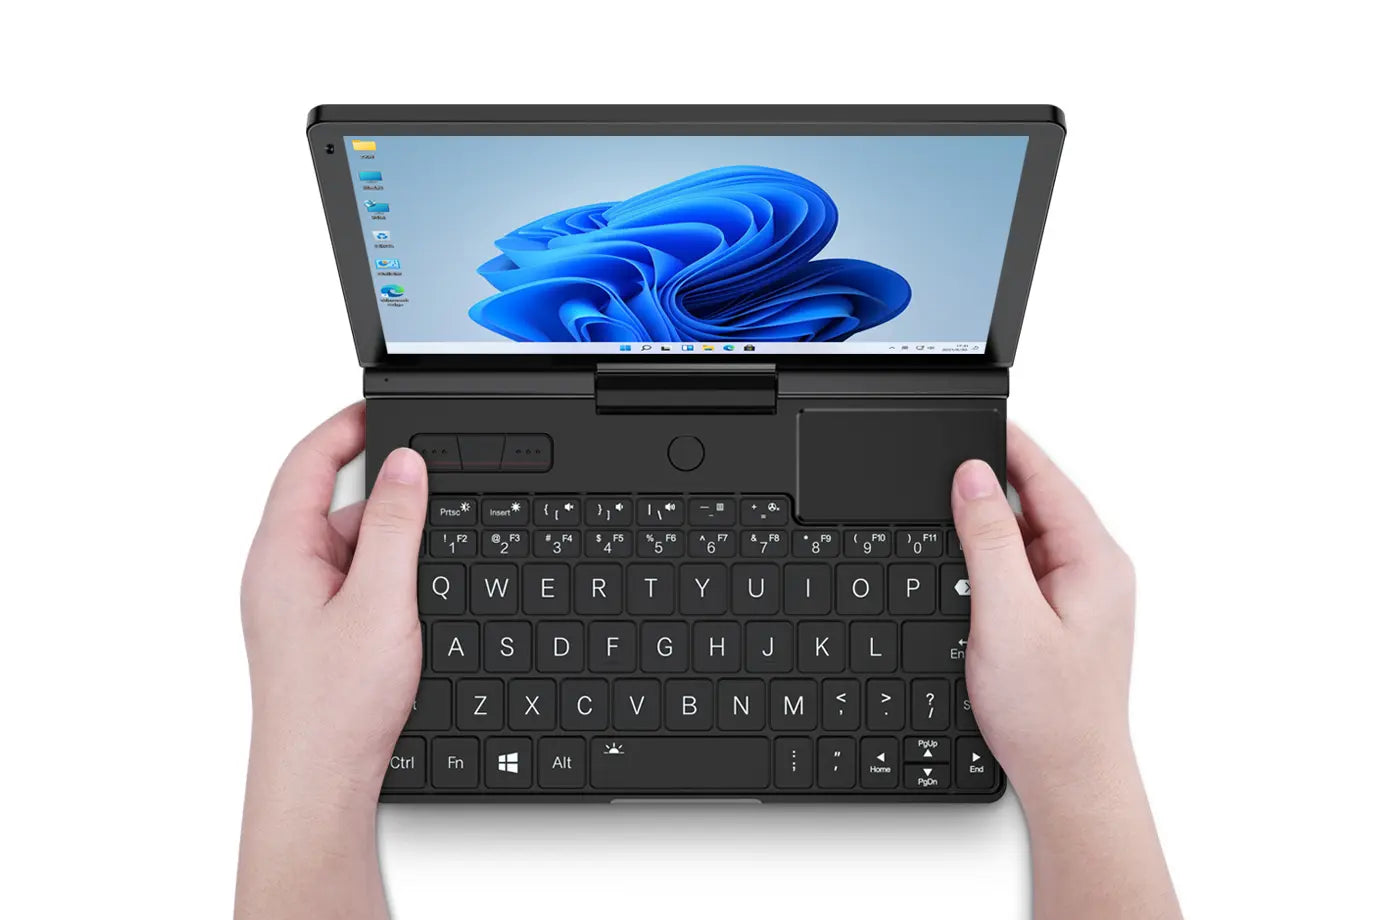 GPD Pocket 3 modular handheld PC with full features3